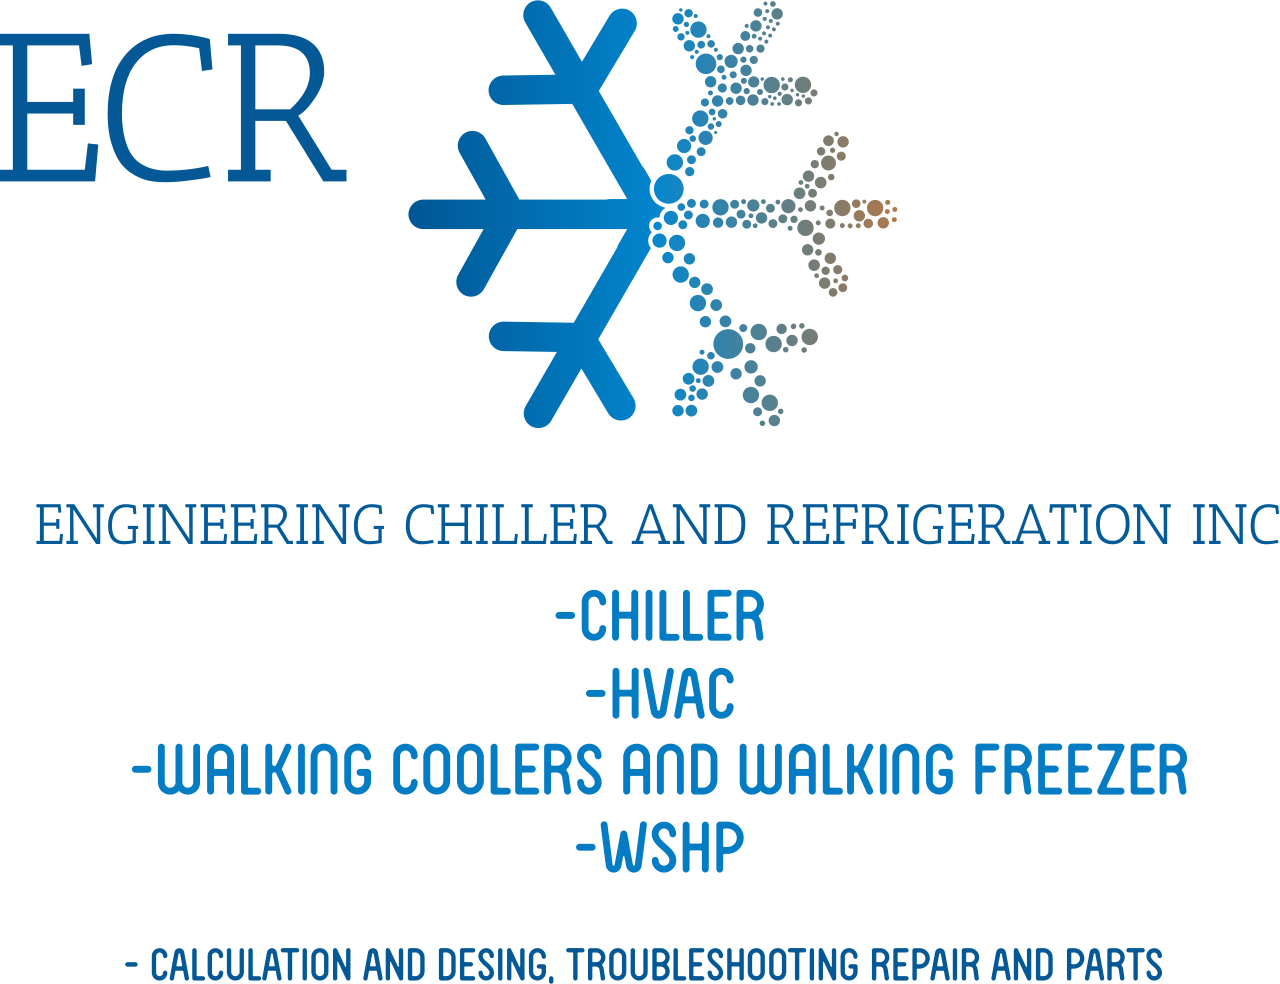 ENGINEERING CHILLER AND REFRIGERATION INC's web page